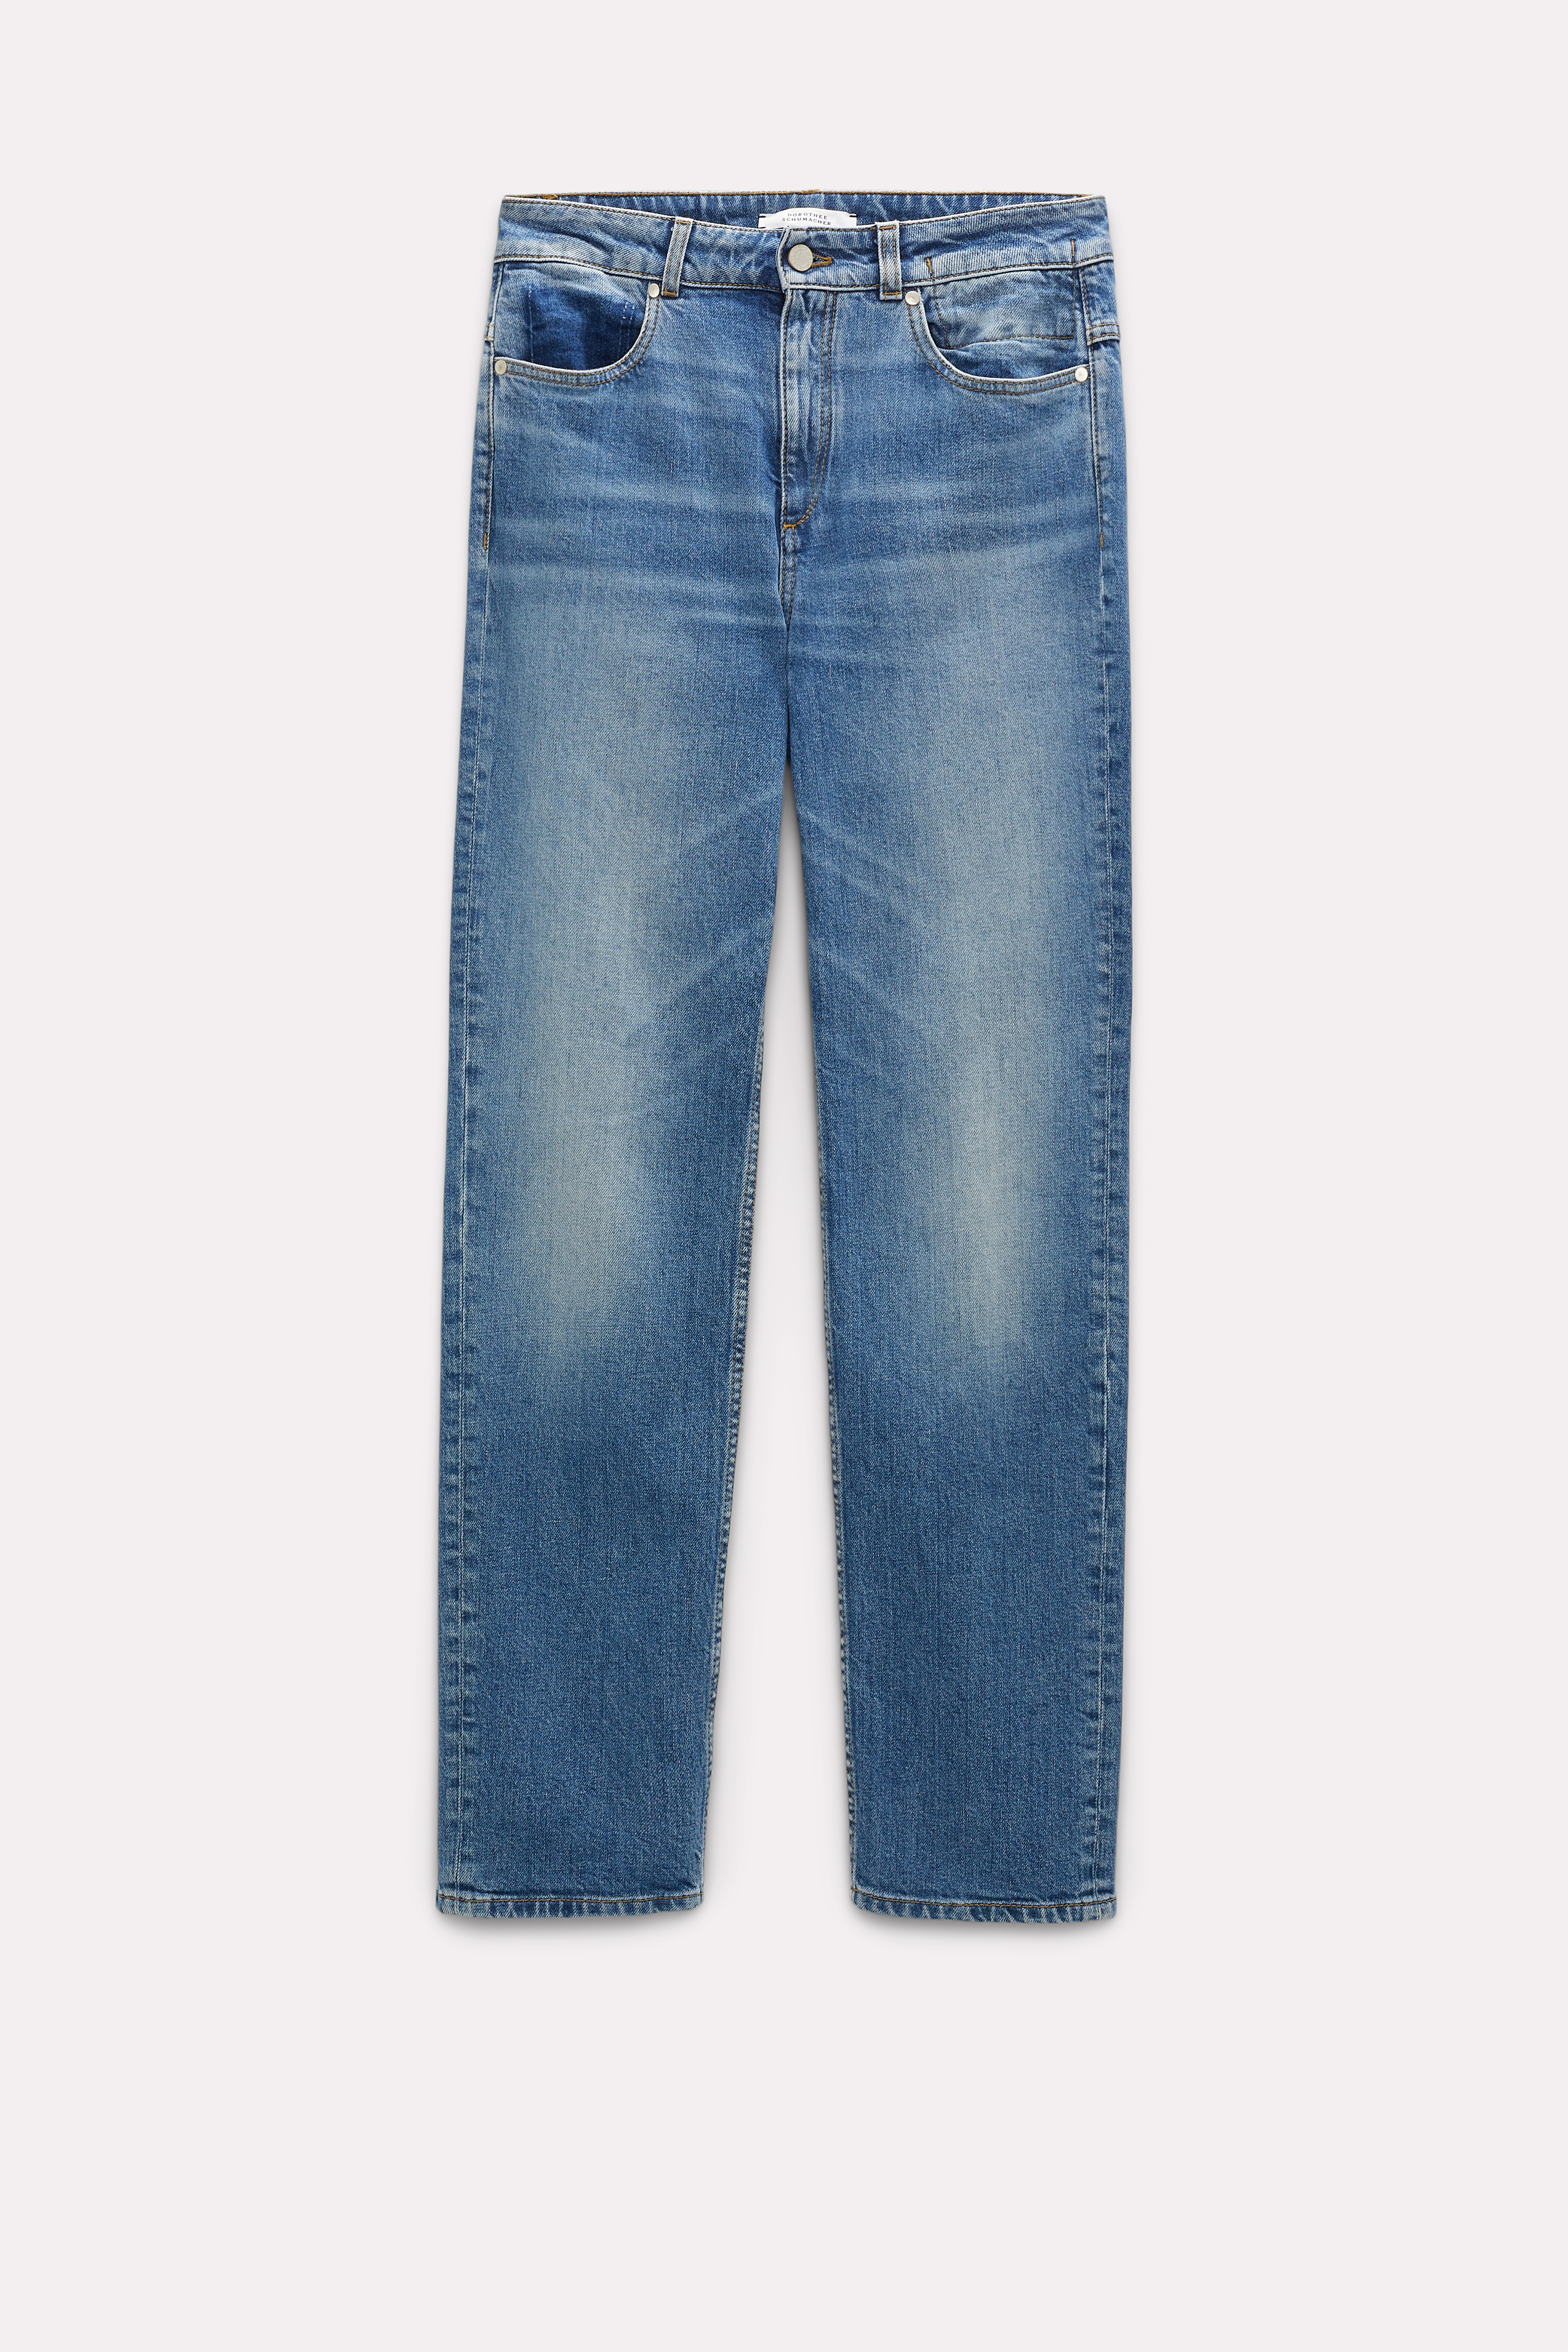 DOROTHEE SCHUMACHER CROPPED JEANS